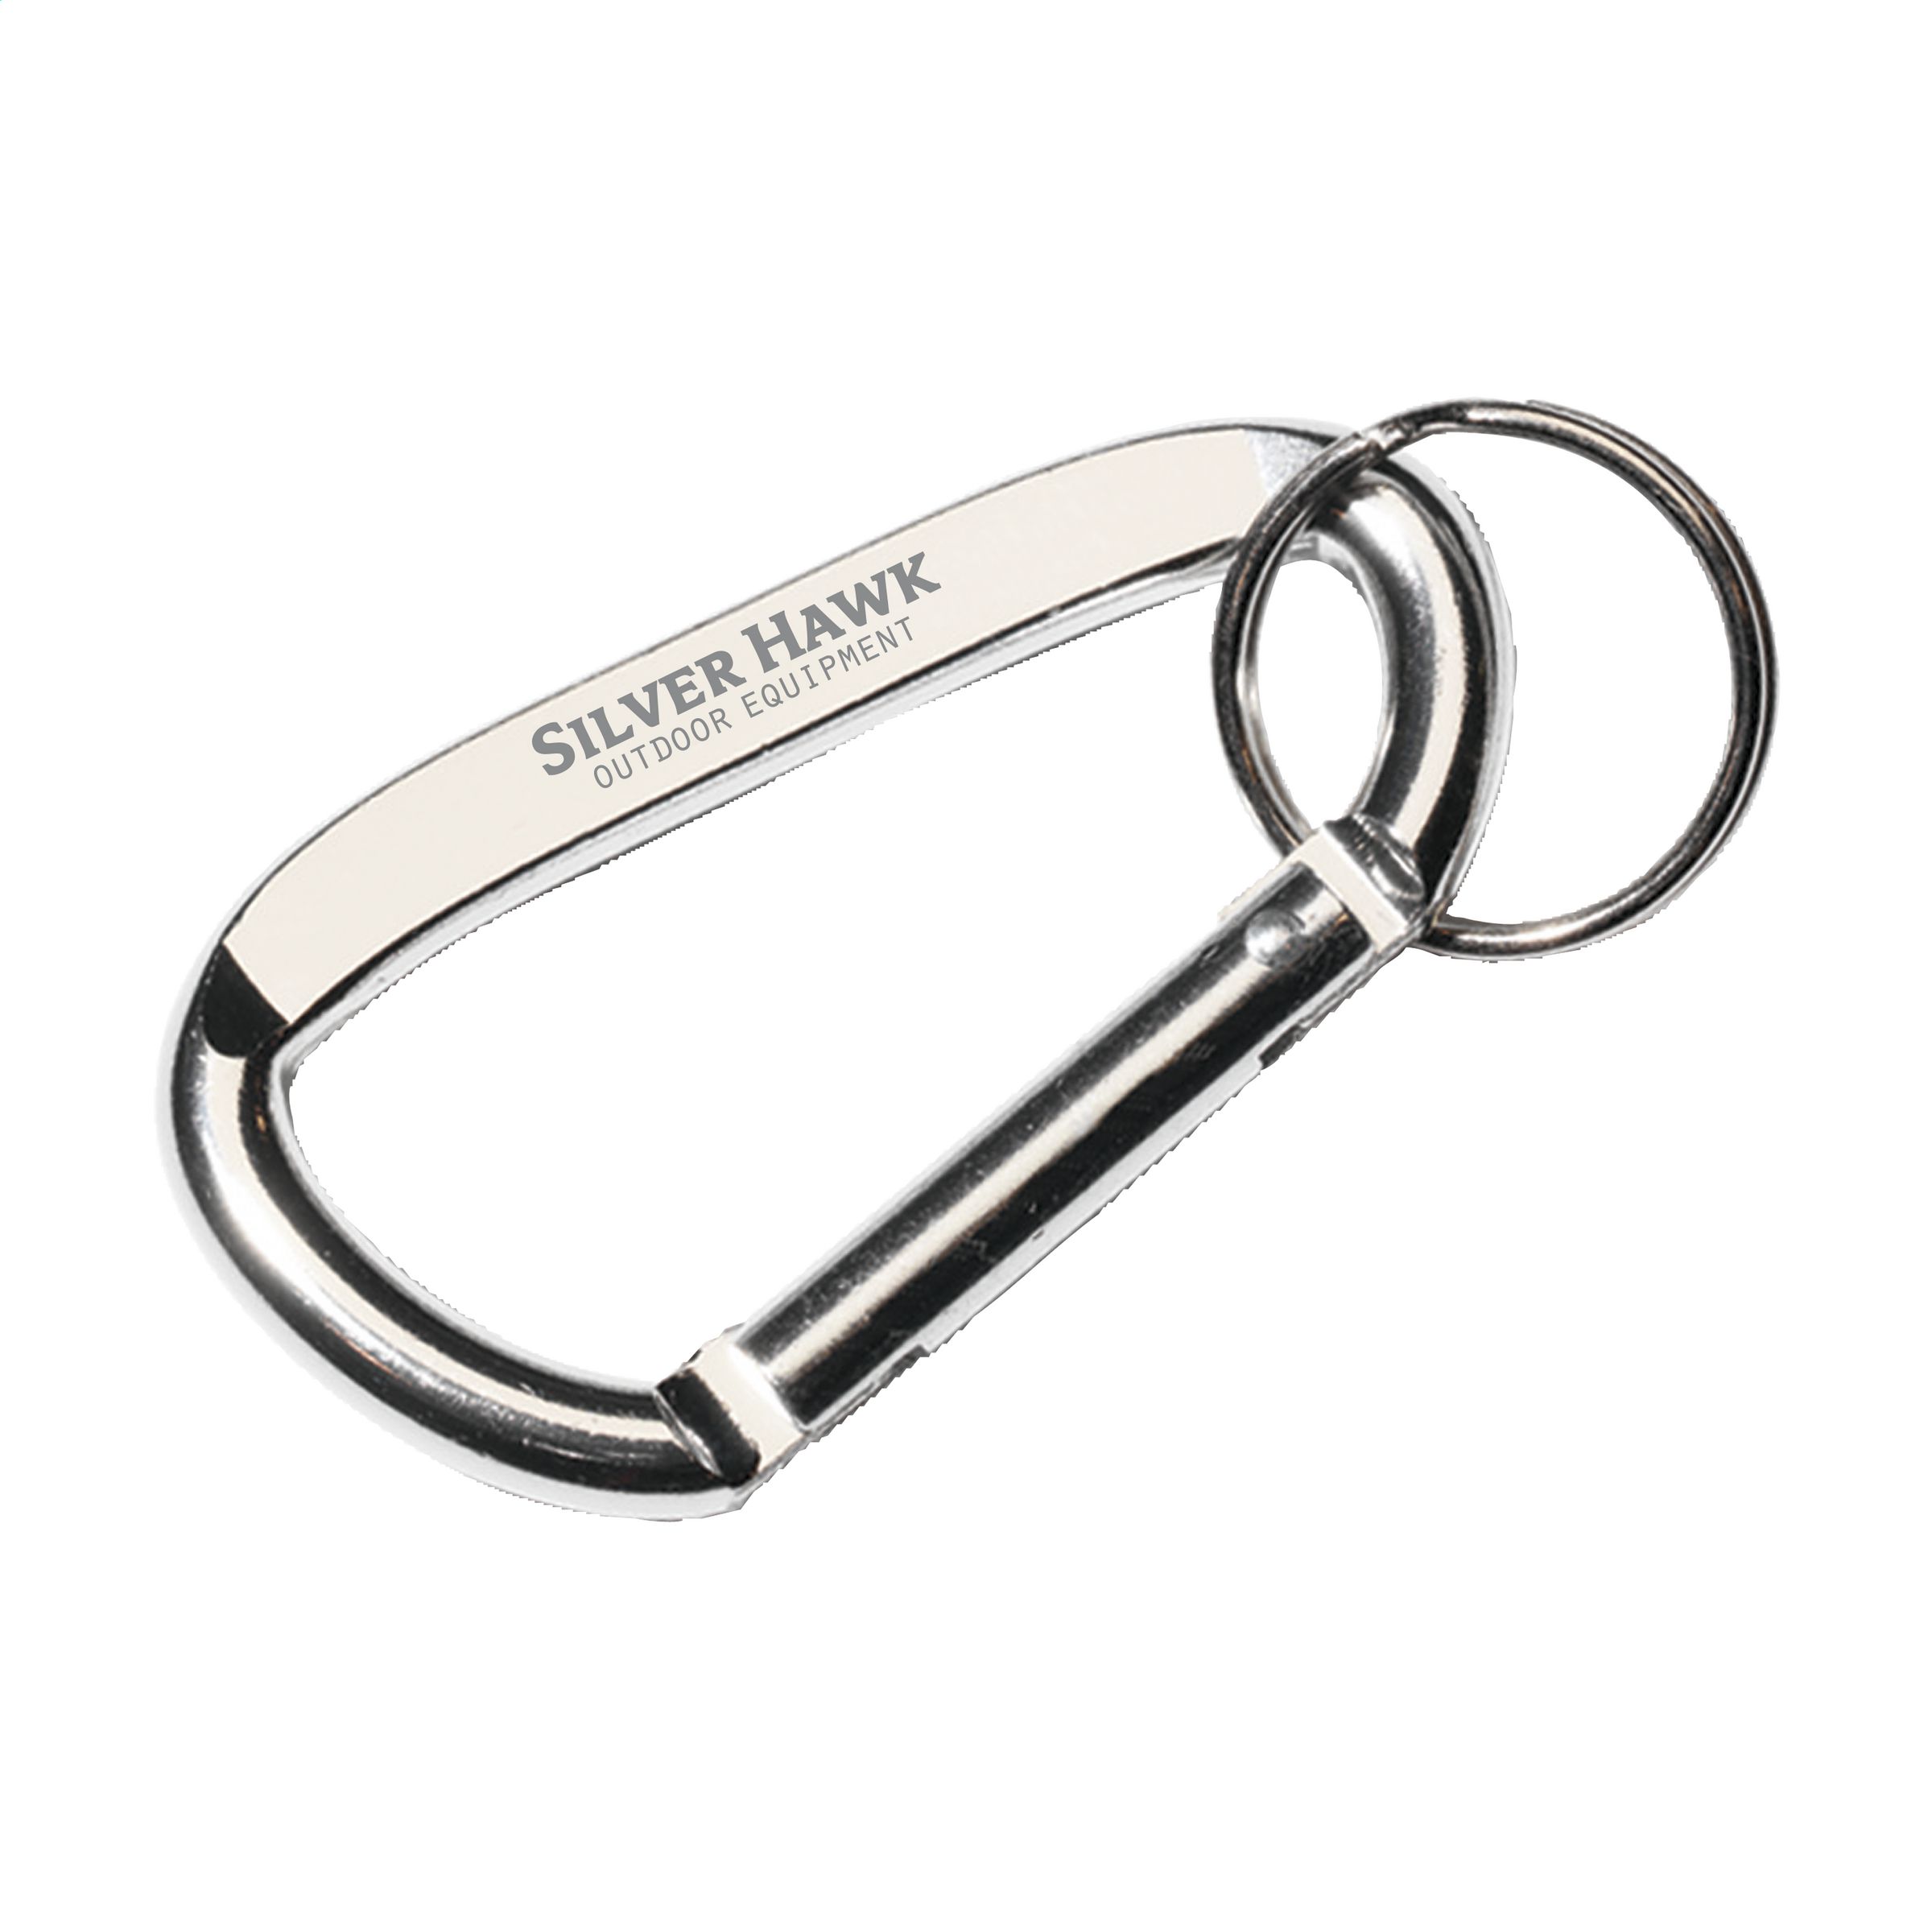 Keychain with Carabiner - Bourton-on-the-Water - Cubbington